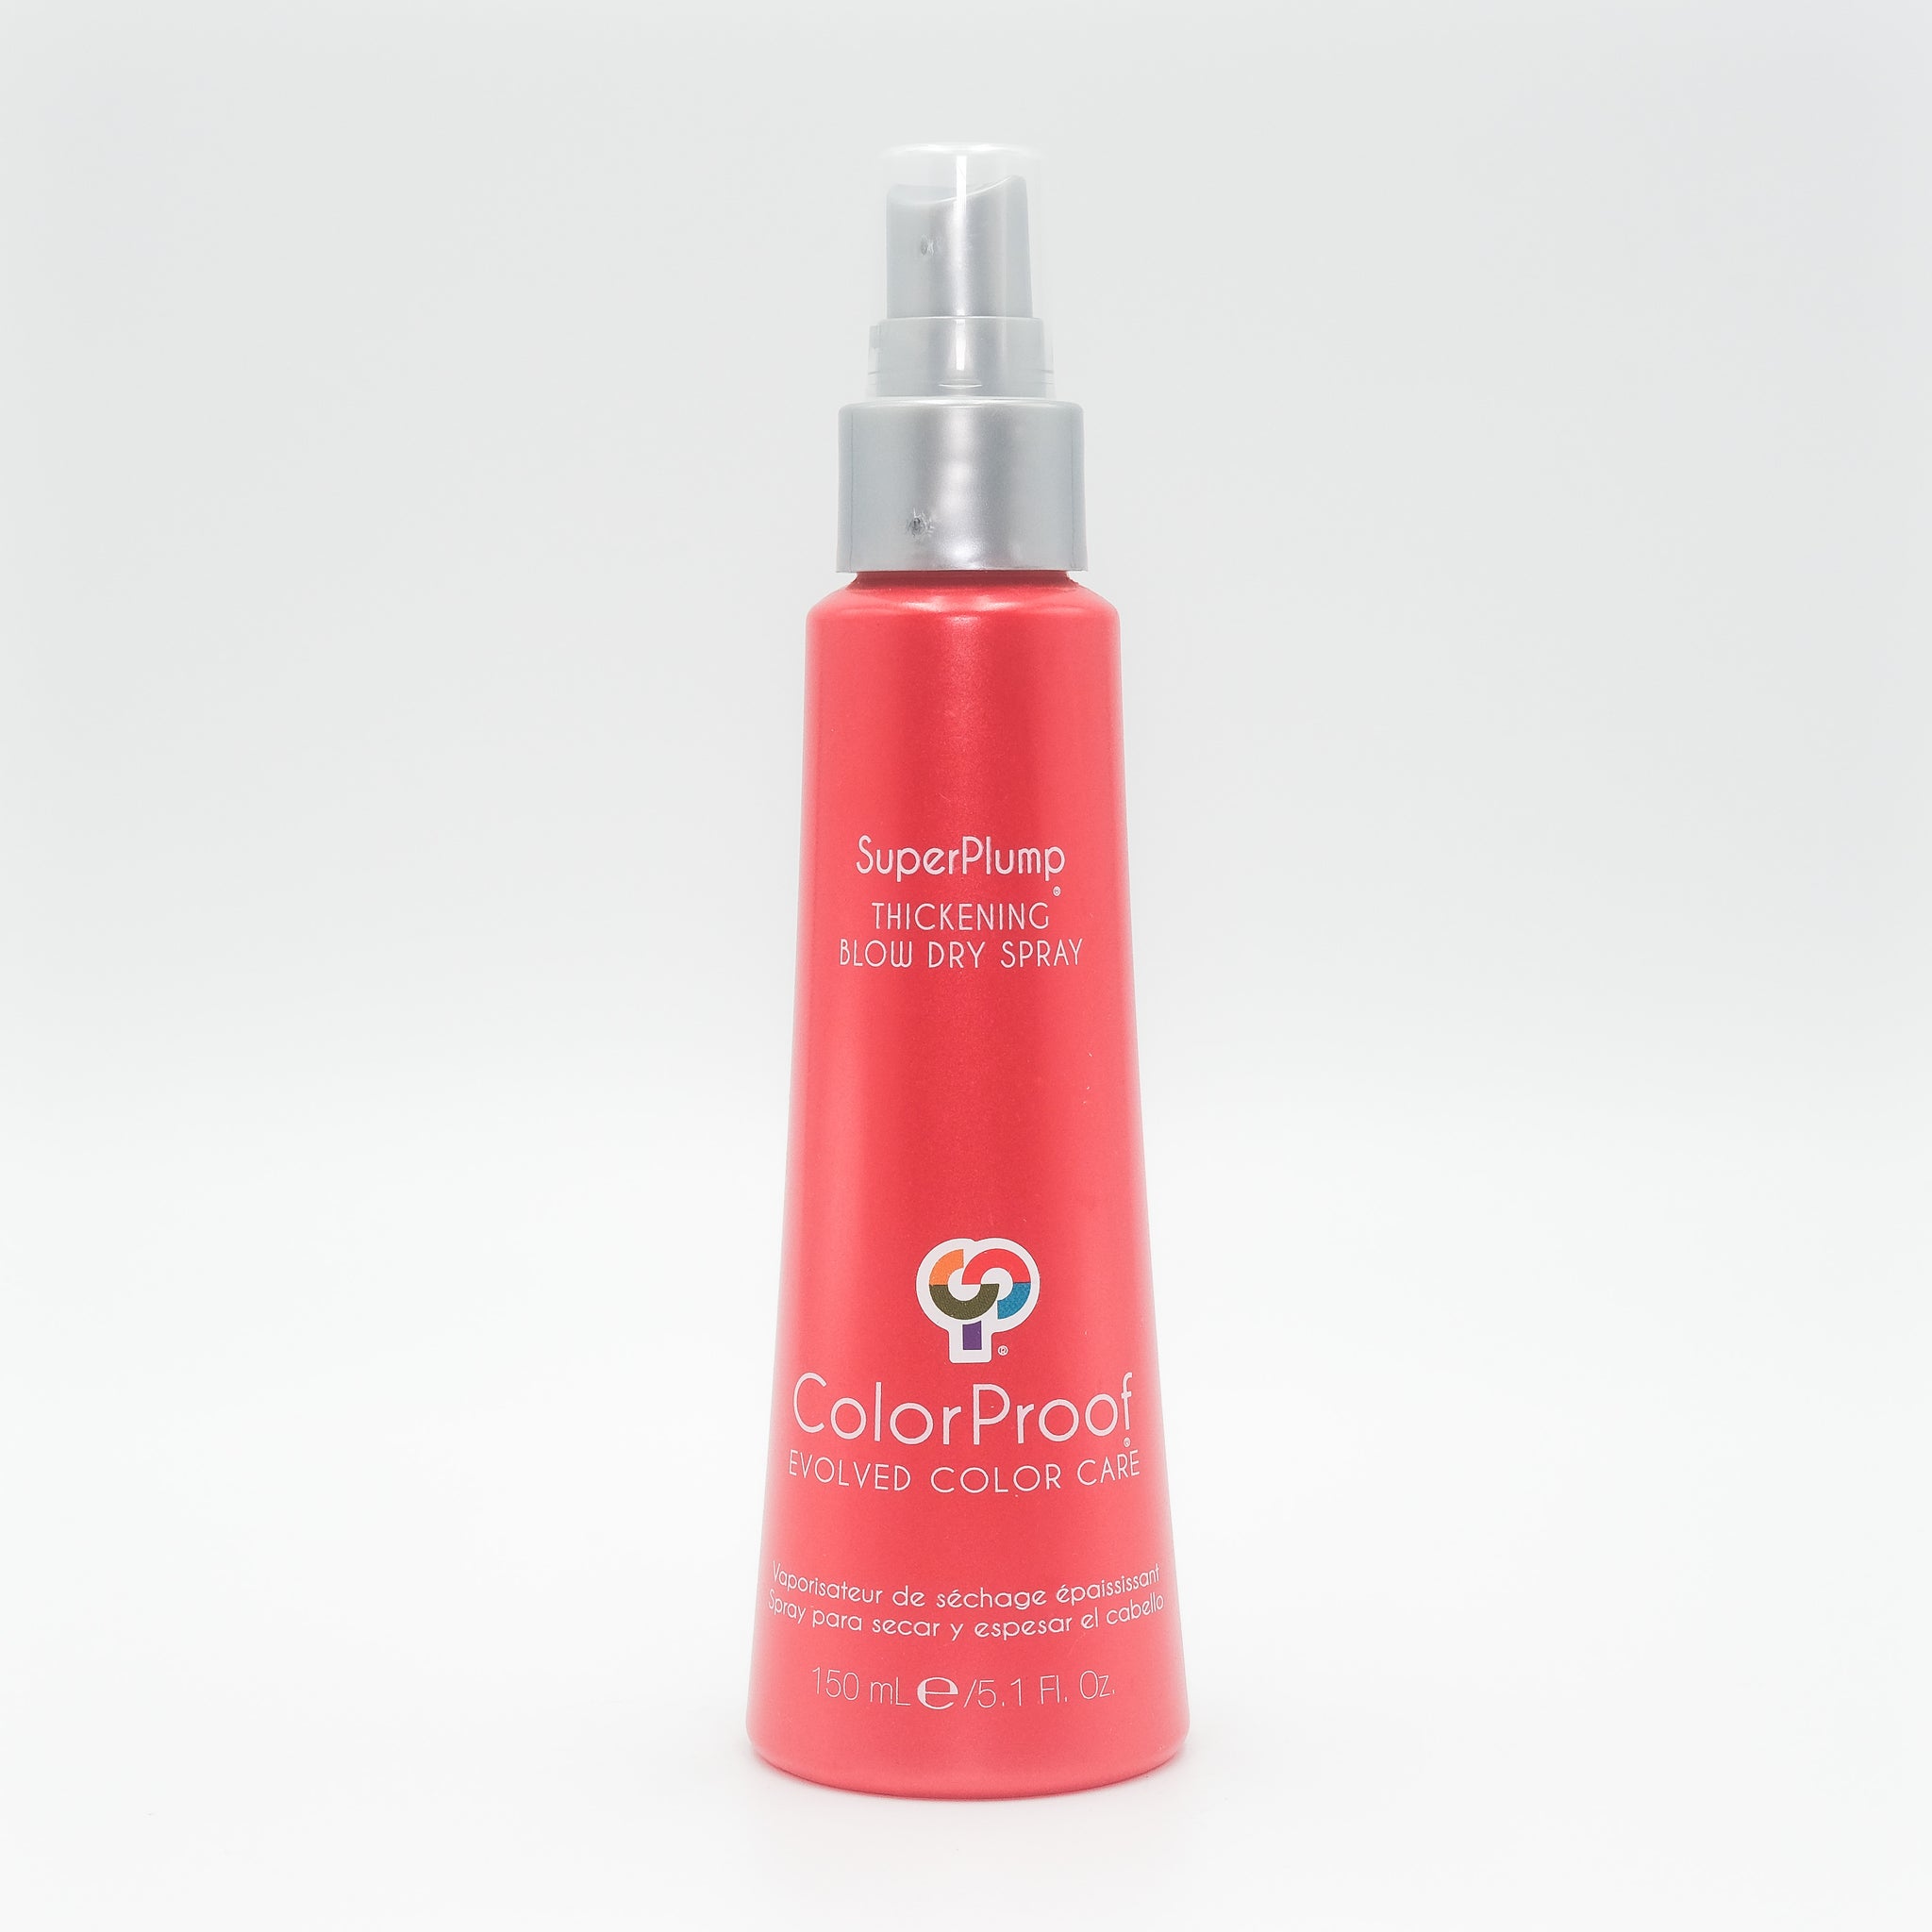 COLOR PROOF Super Plump Thickening Blow Dry Spray 5.1 oz